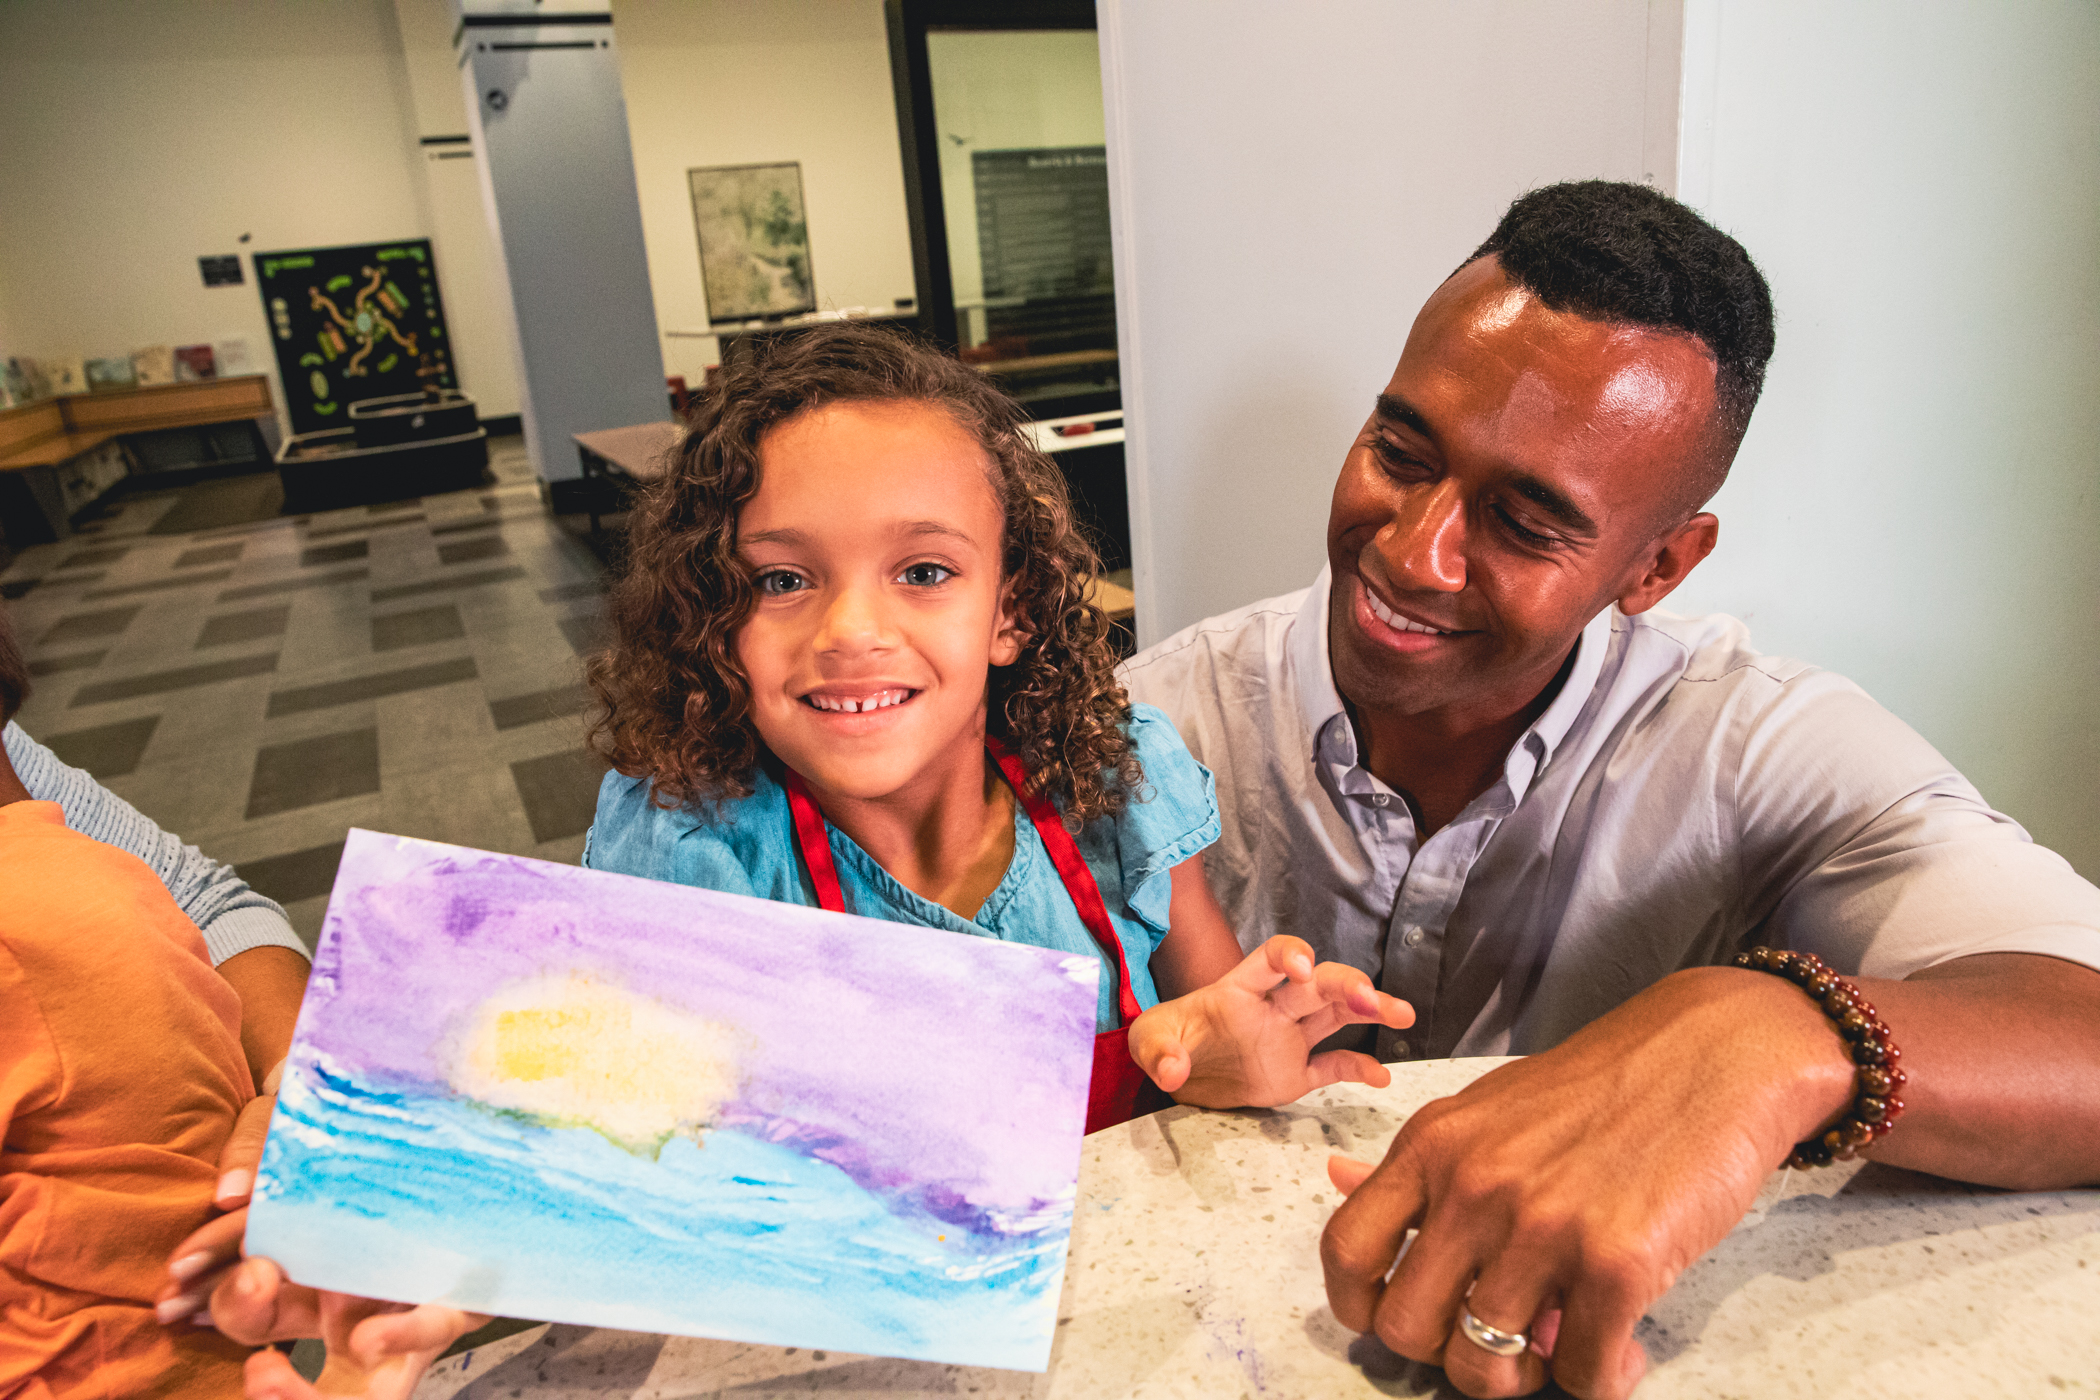 Young girl holding up a painting she made as her dad looks at her and smiles